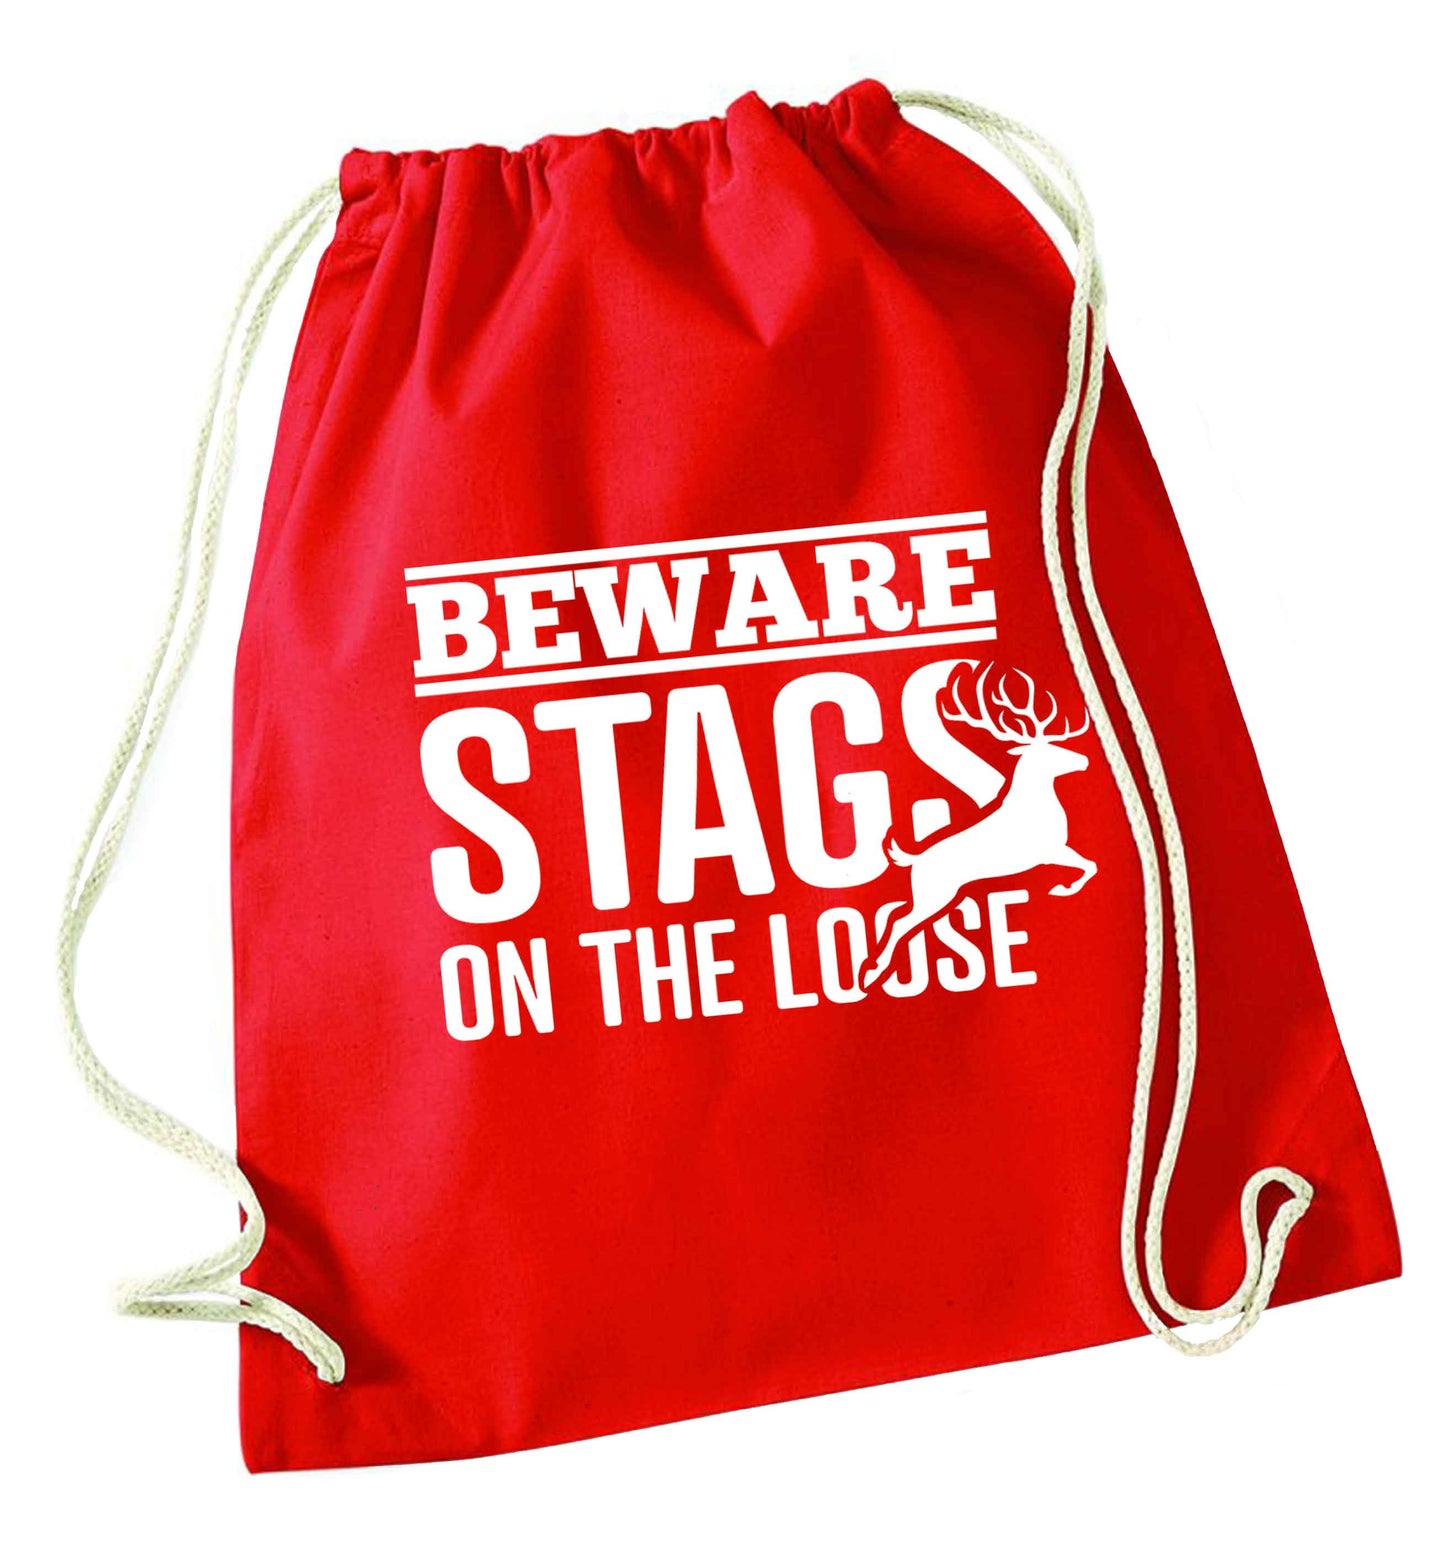 Beware stags on the loose red drawstring bag 